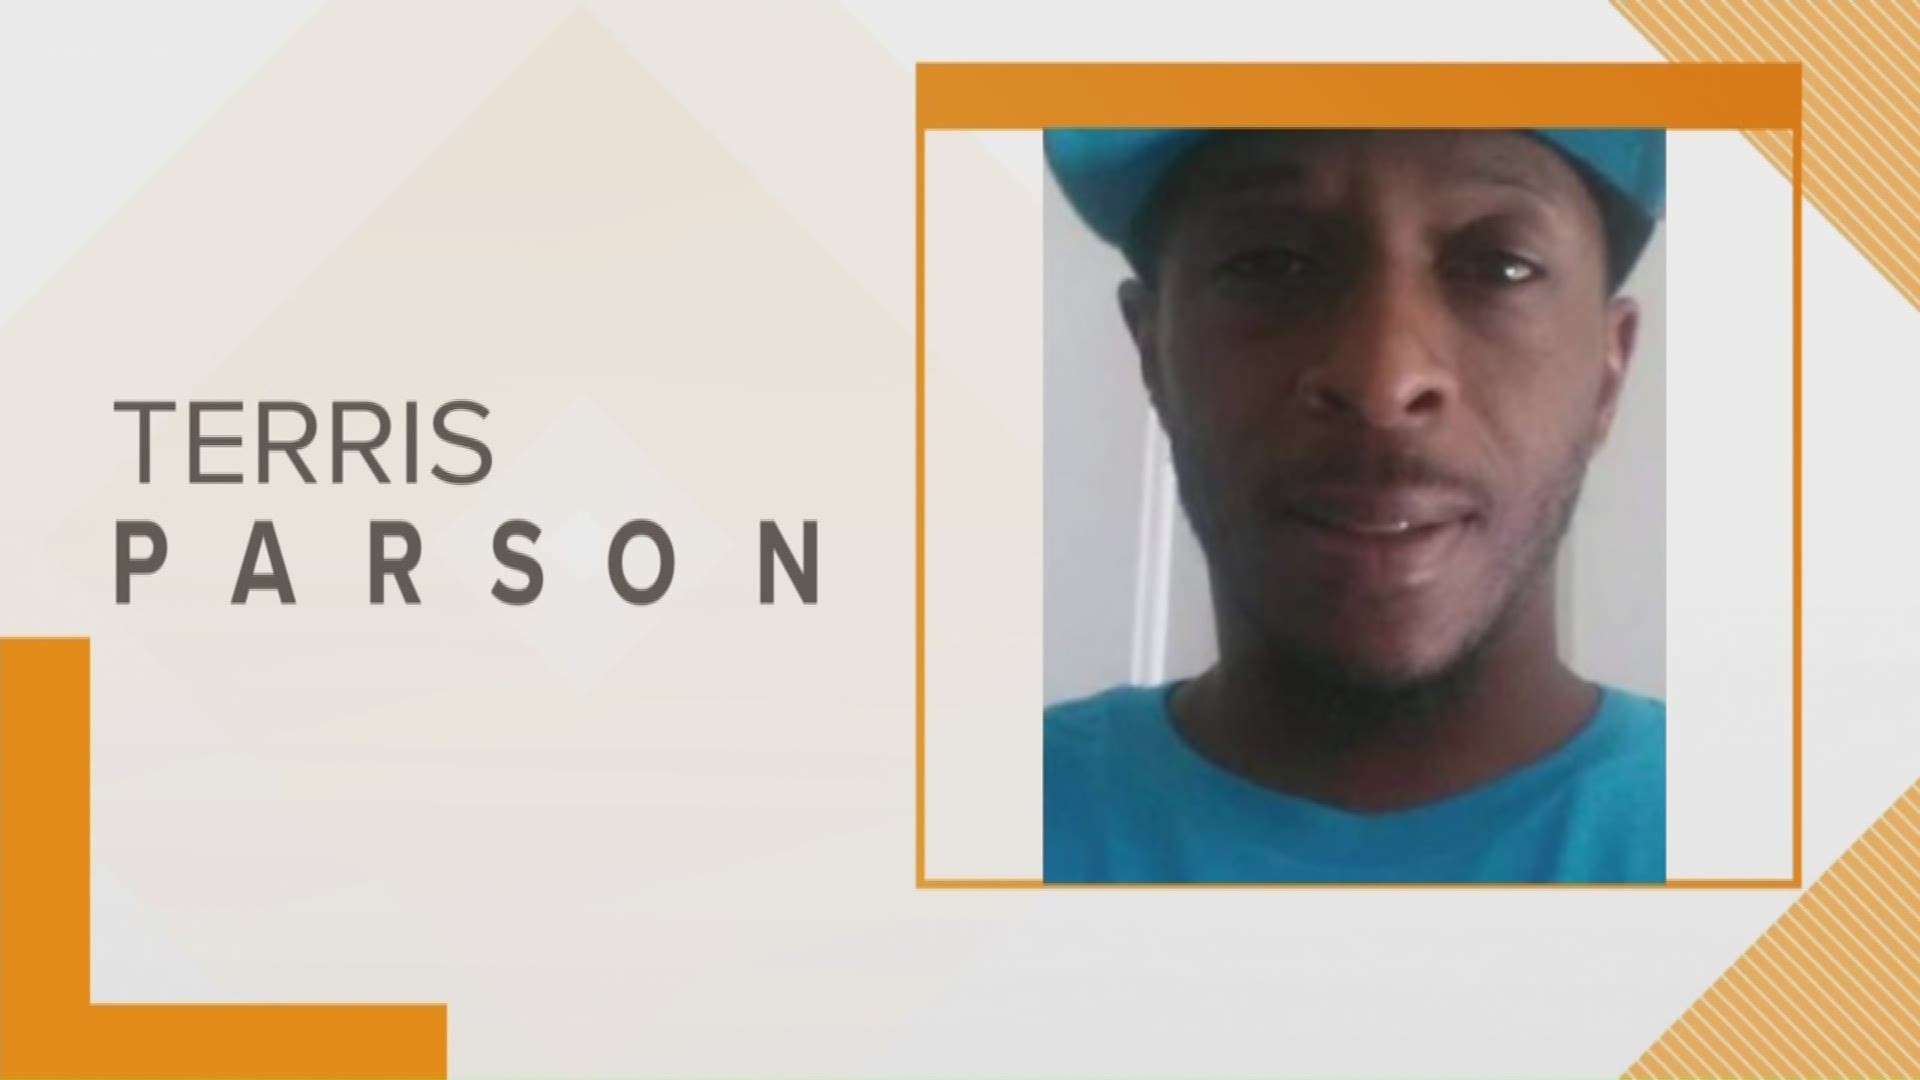 If you had any contact with Parson Since Sunday night or you have any information as to his whereabouts, police ask you to contact Detective Jack Henderson at (843) 537-7868 or Crimestoppers.